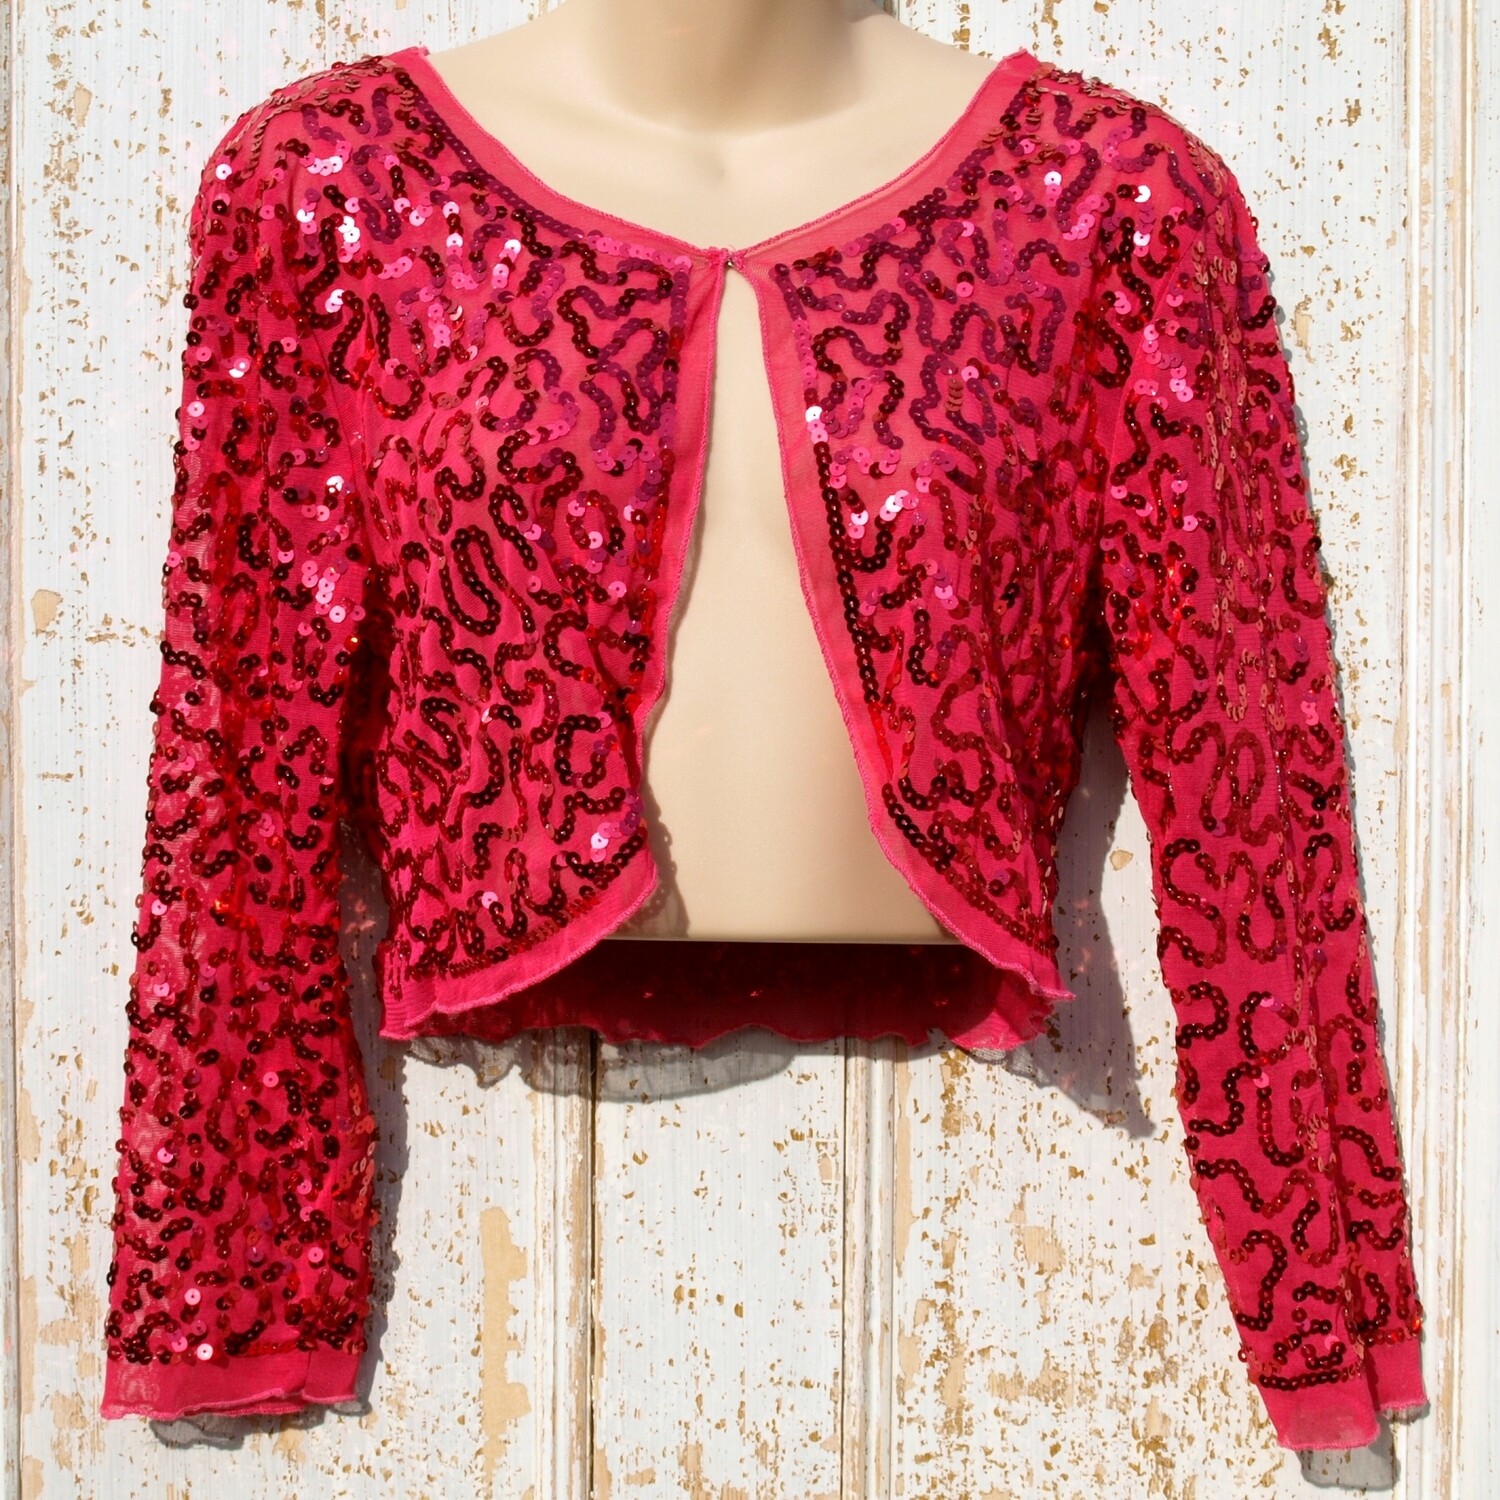 Pink Sequin Party Cardigan or Bolero by Maner